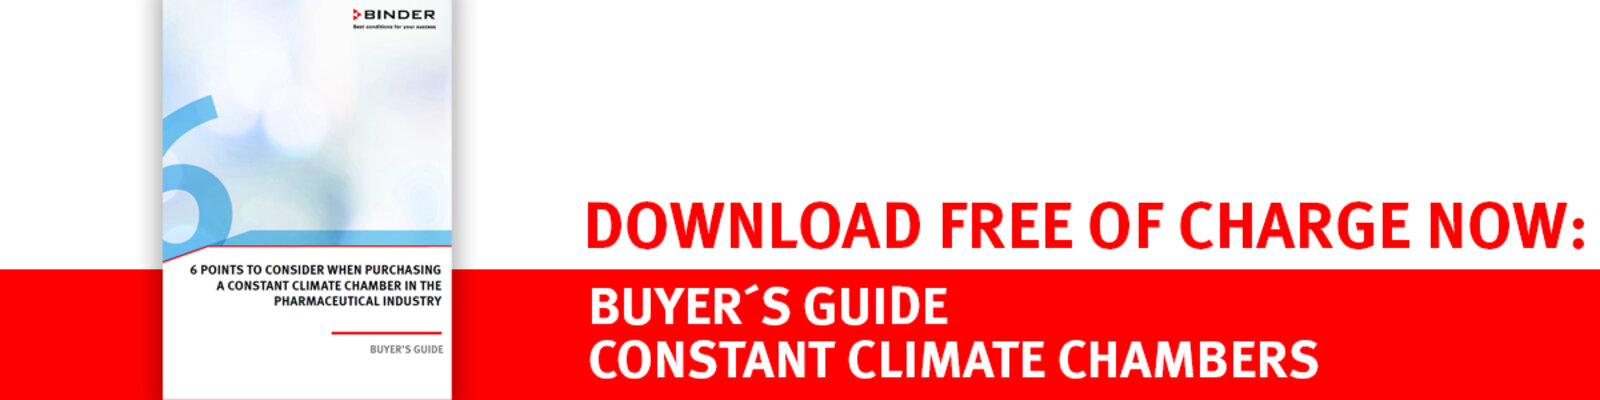 Download free of charge - Buyer's Guide constant climate chambers